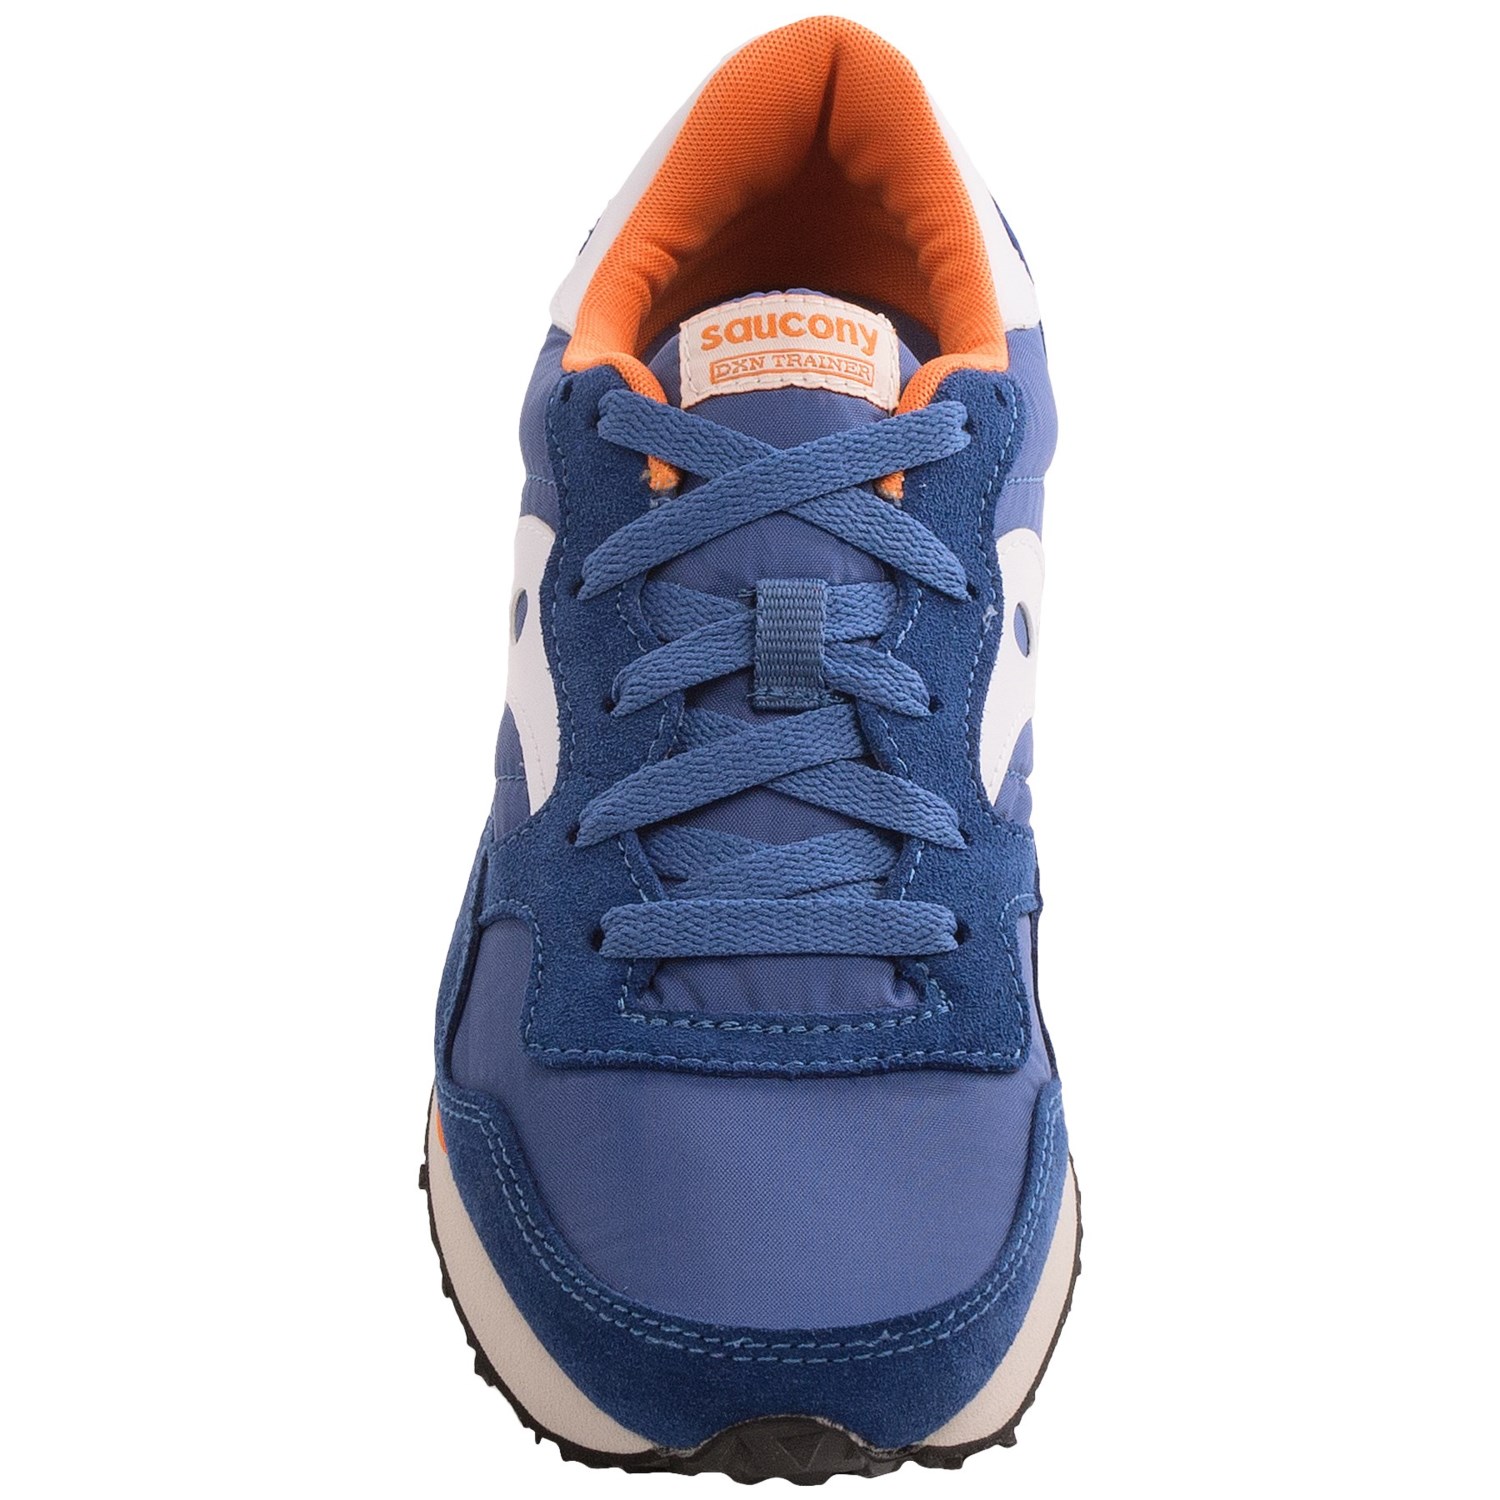 saucony dxn trainer blue green